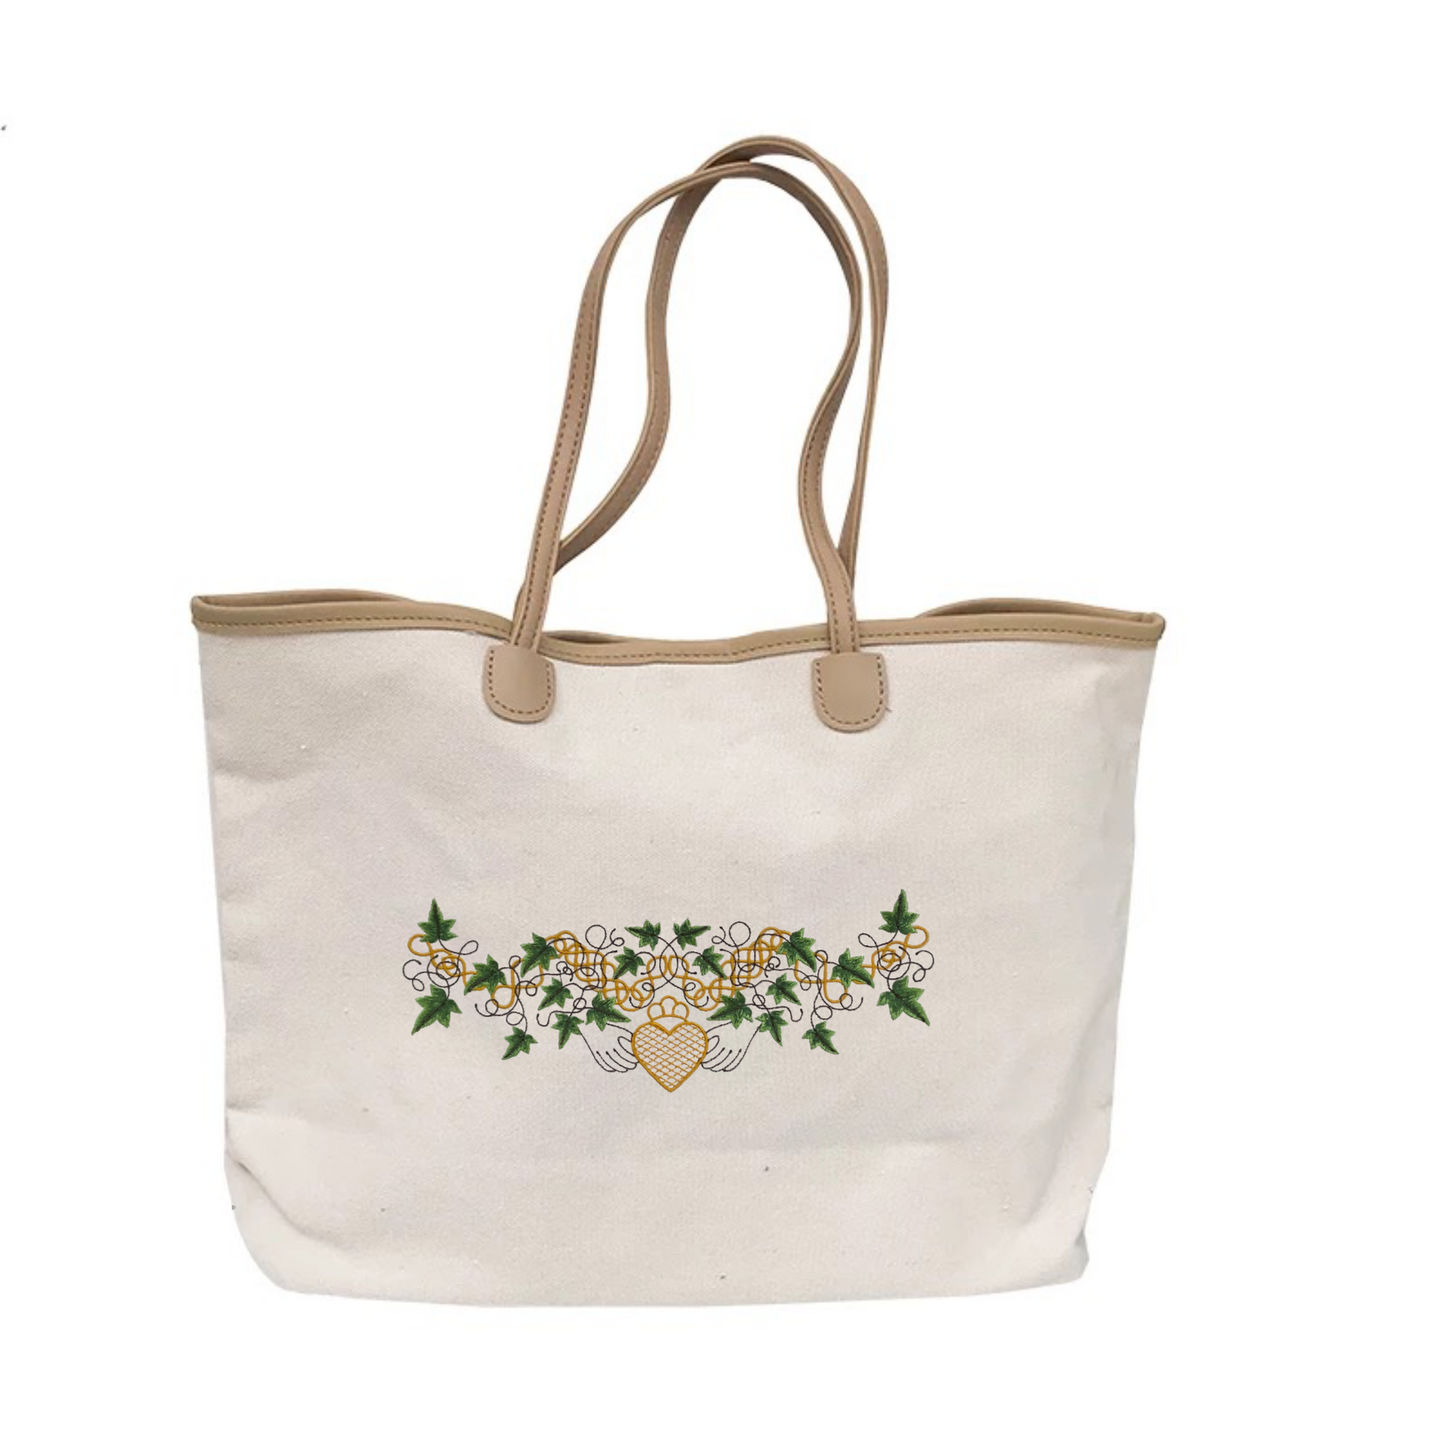 Claddagh Embroidered Cotton Canvas Market Bag. Choice of 5 different bags